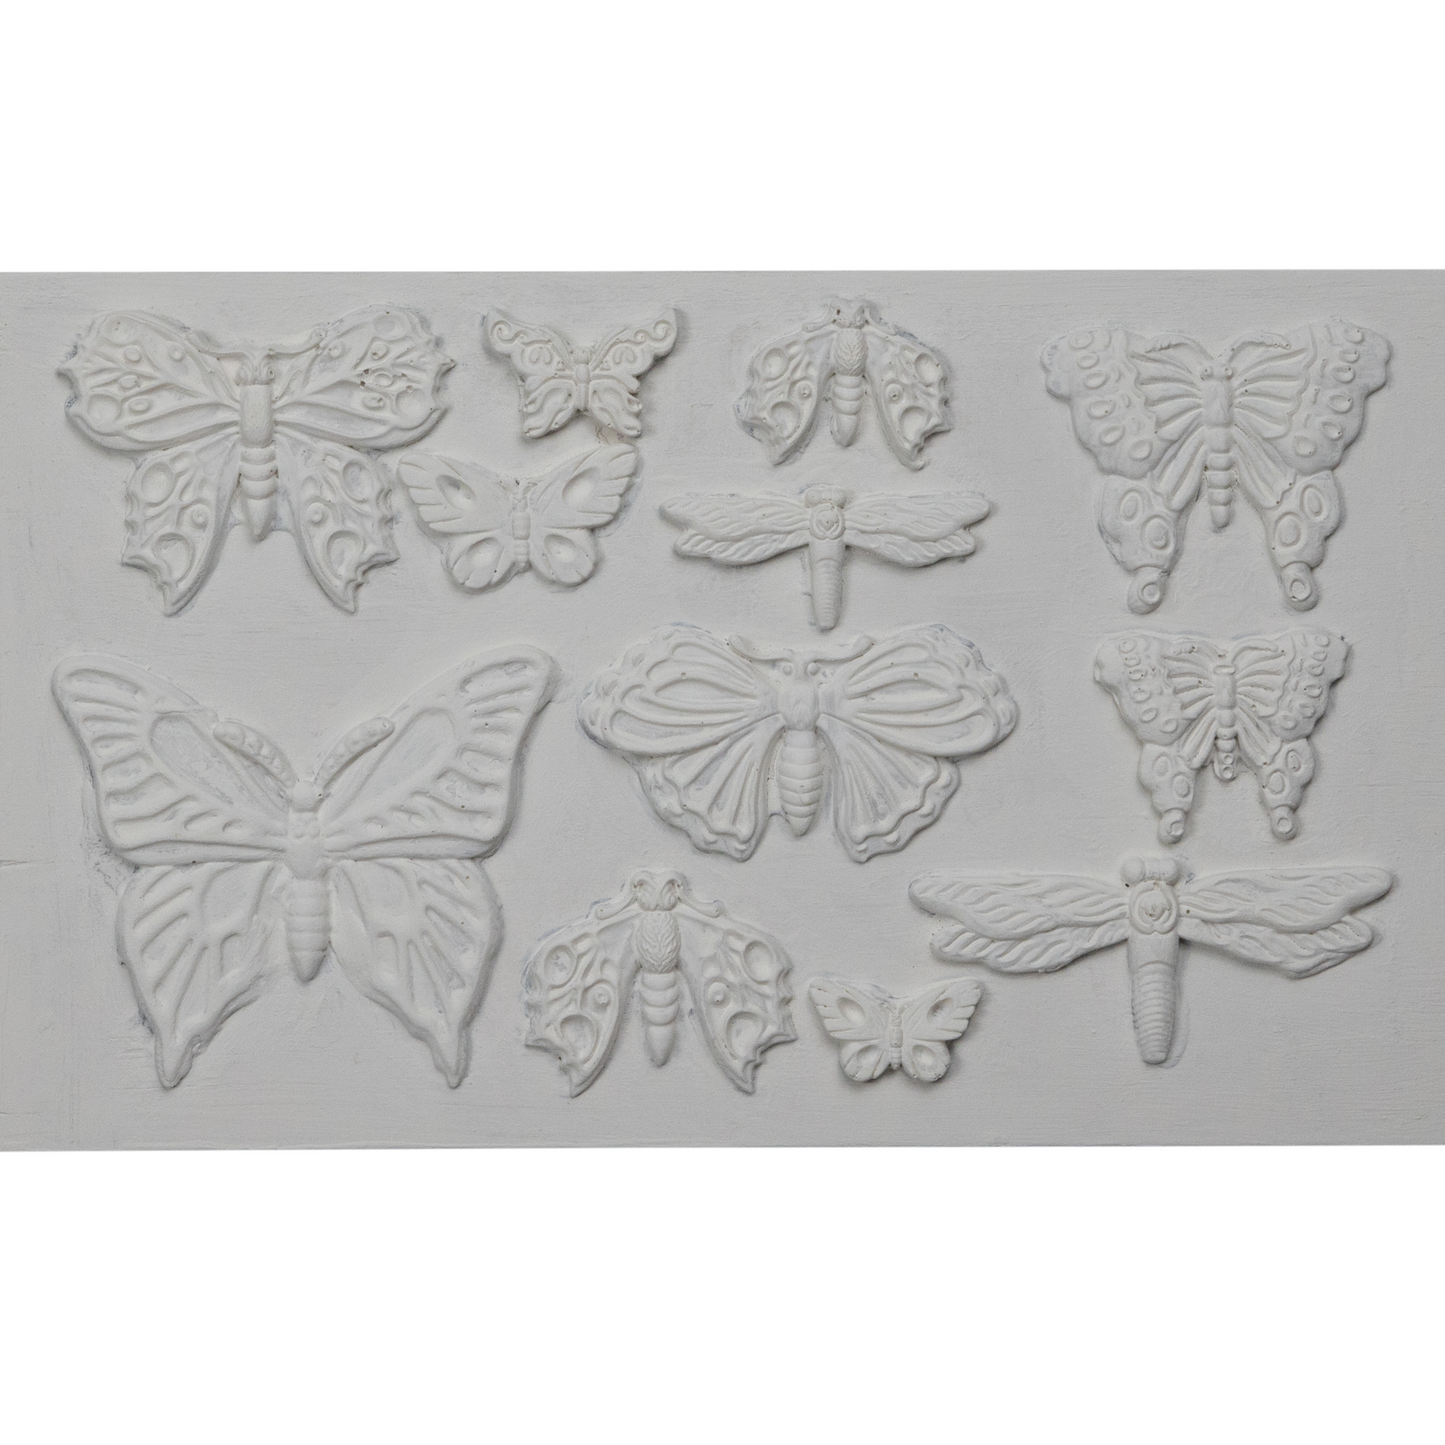 IOD Silicone Mould "Monarch" by Iron Orchid Designs -casting examples. IOD molds available at Milton's Daughter